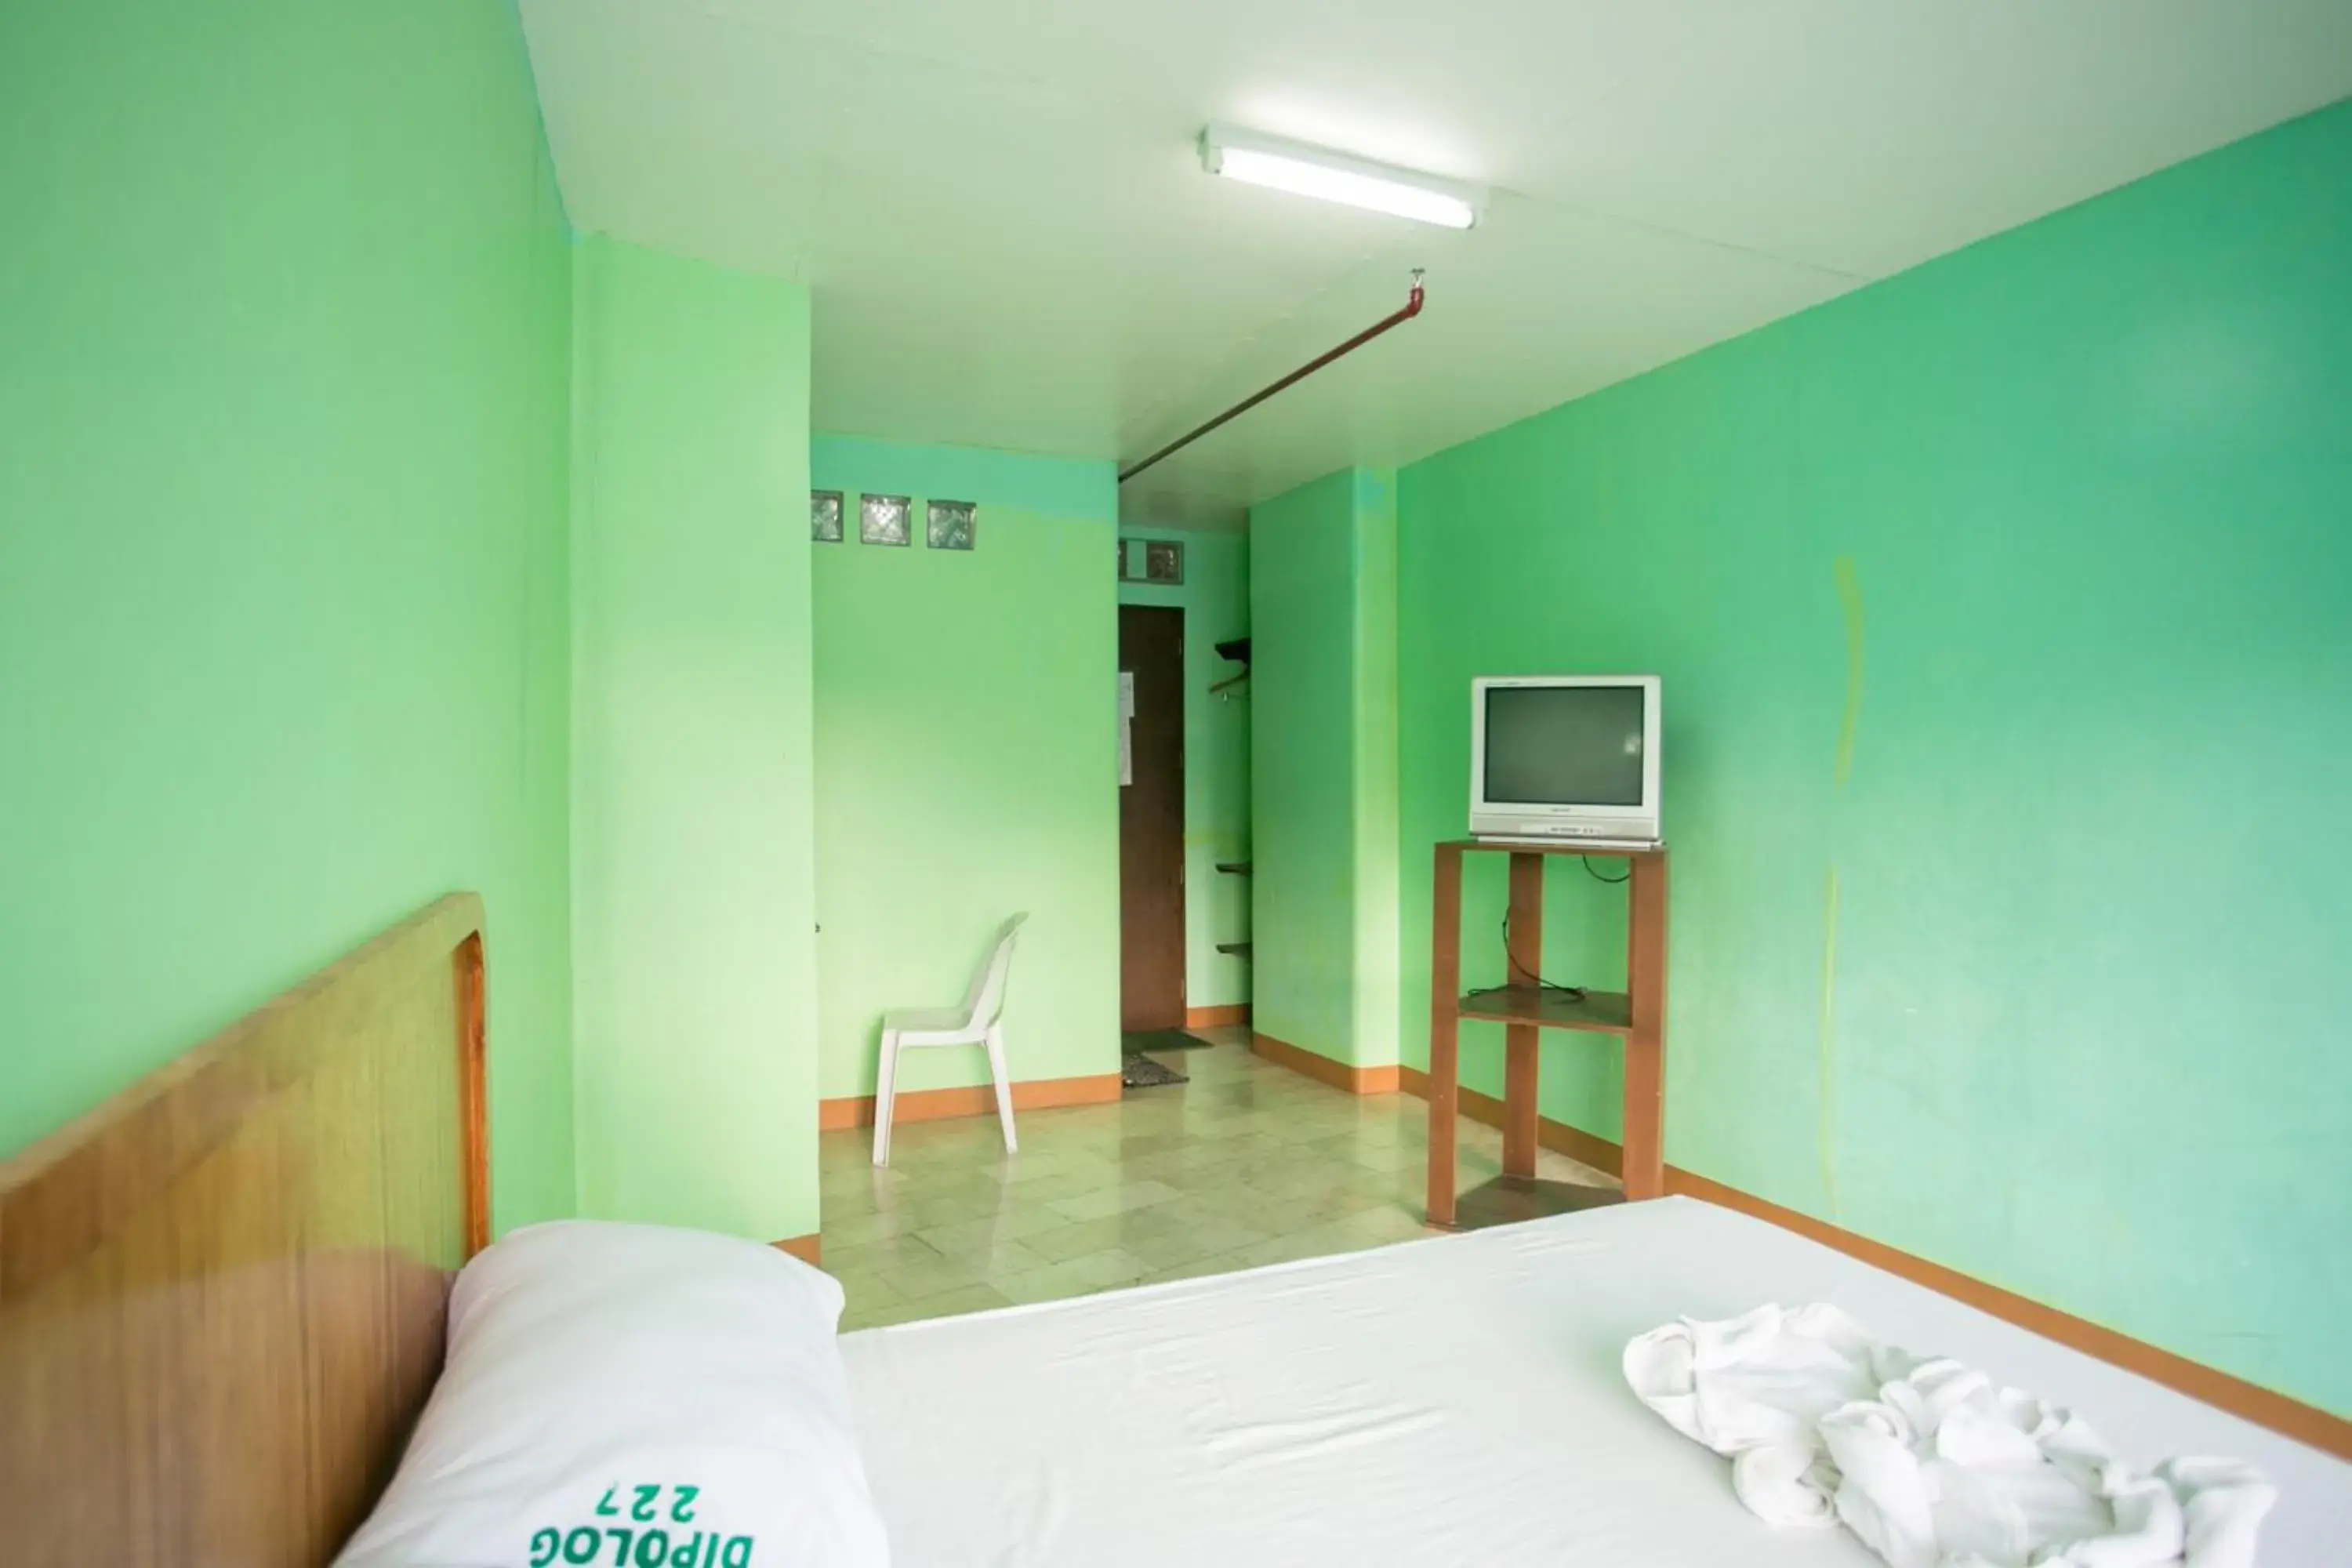 Standard Double Room in GV Hotel - Dipolog